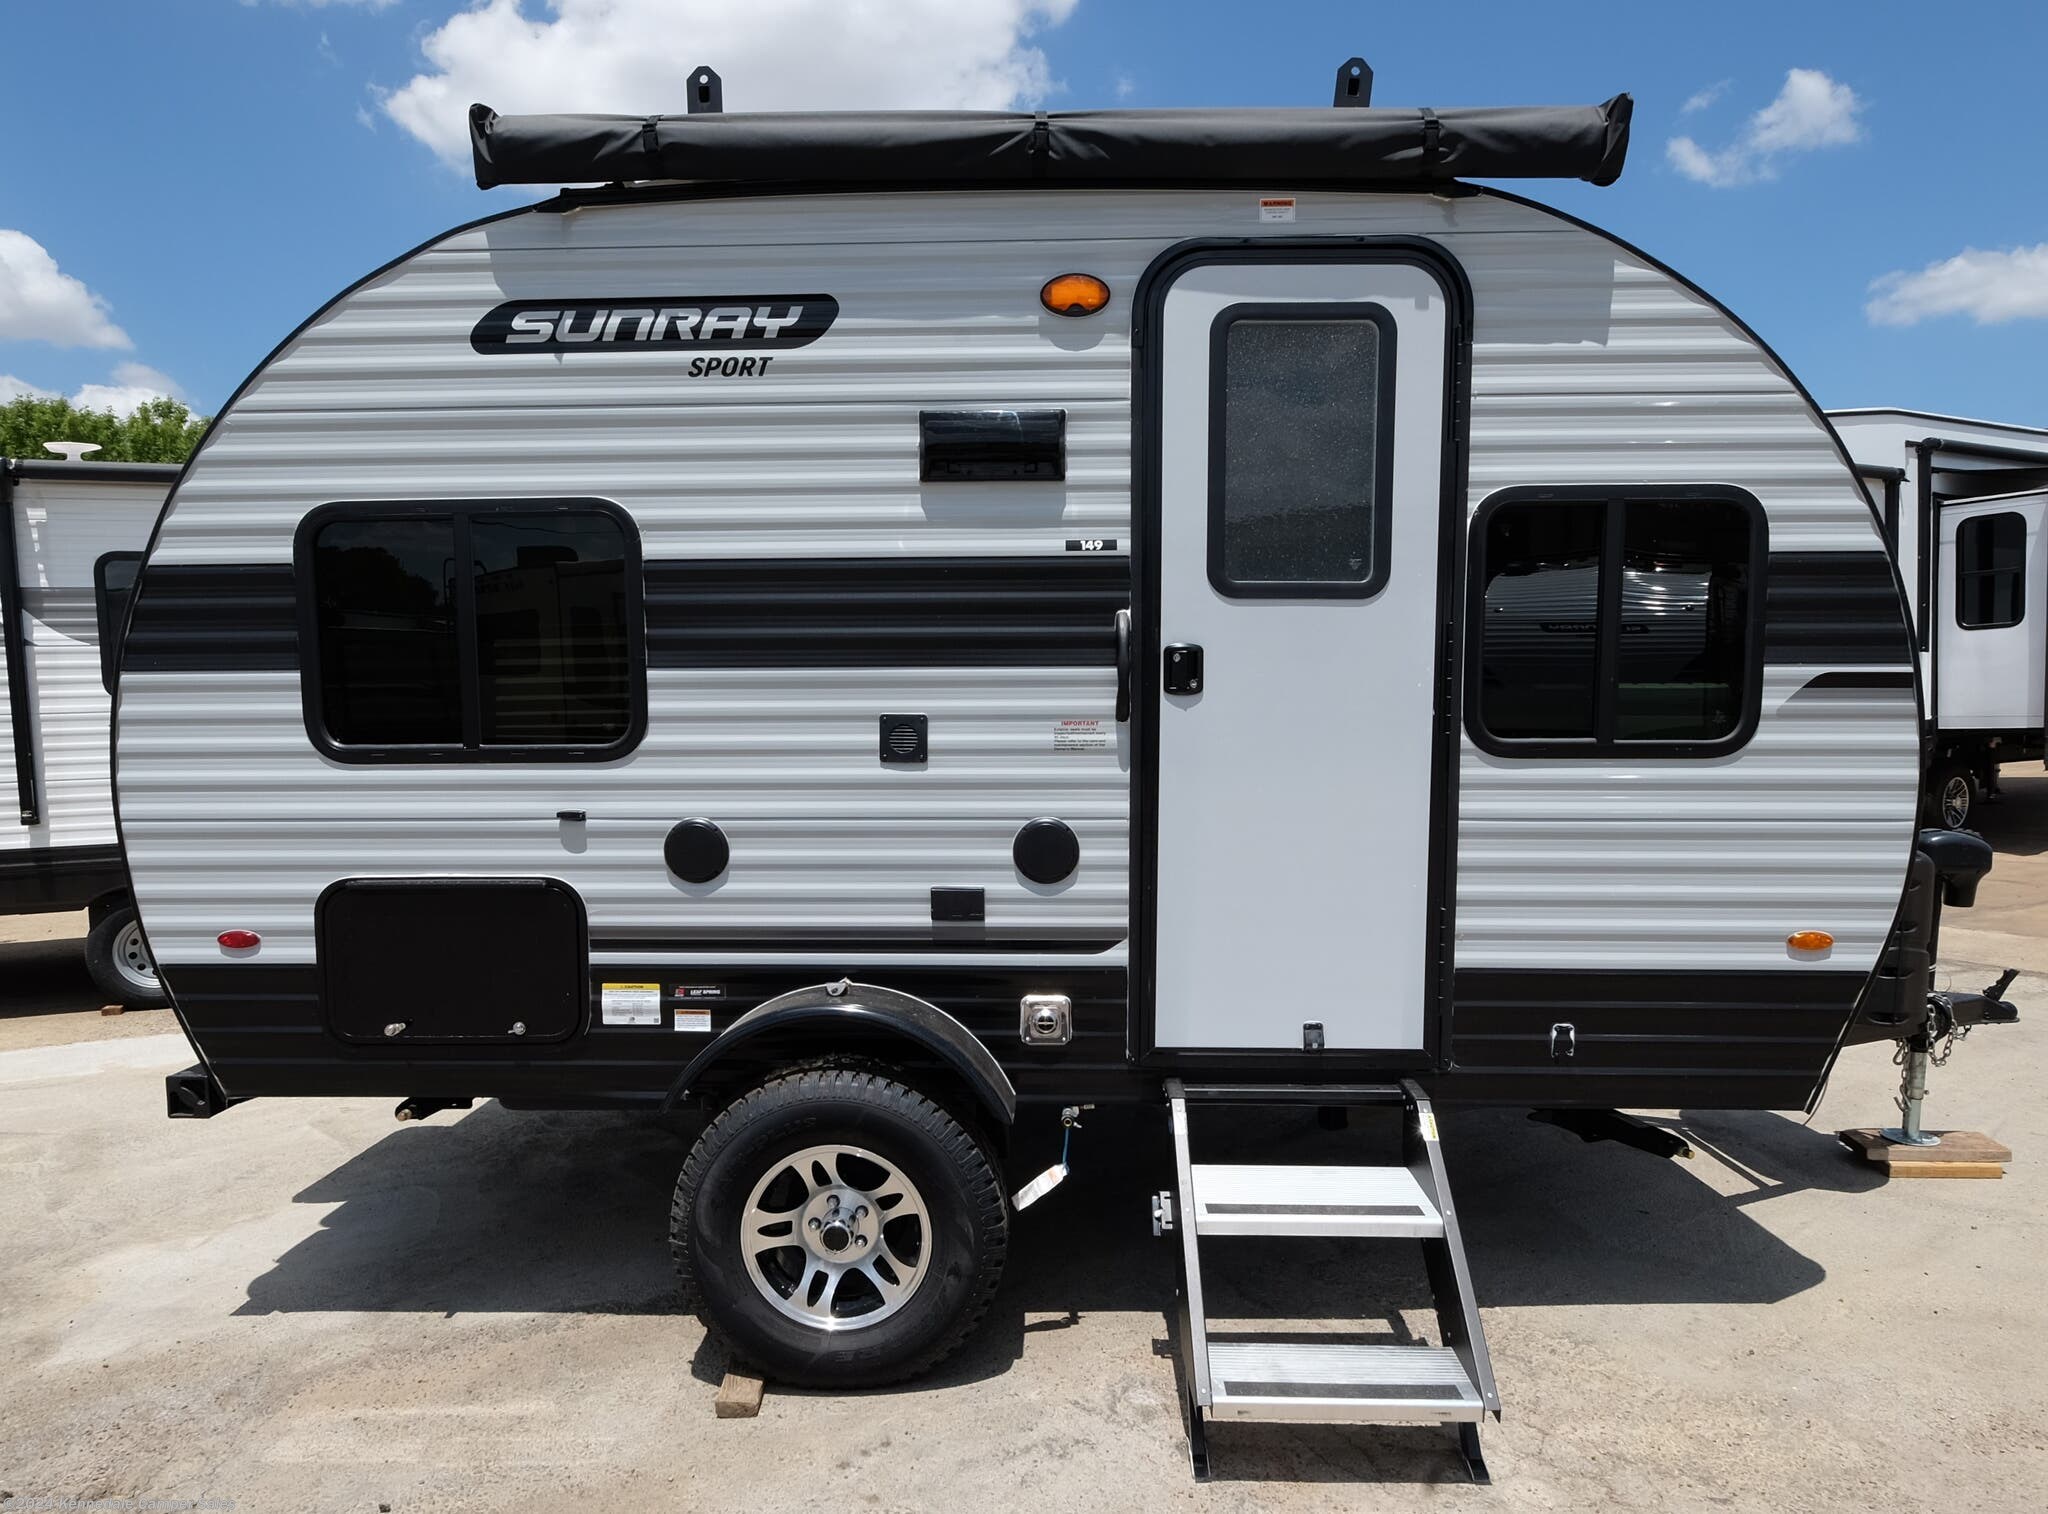 2022 Sunset Park RV SunRay 149 RV for Sale in Kennedale, TX 76060